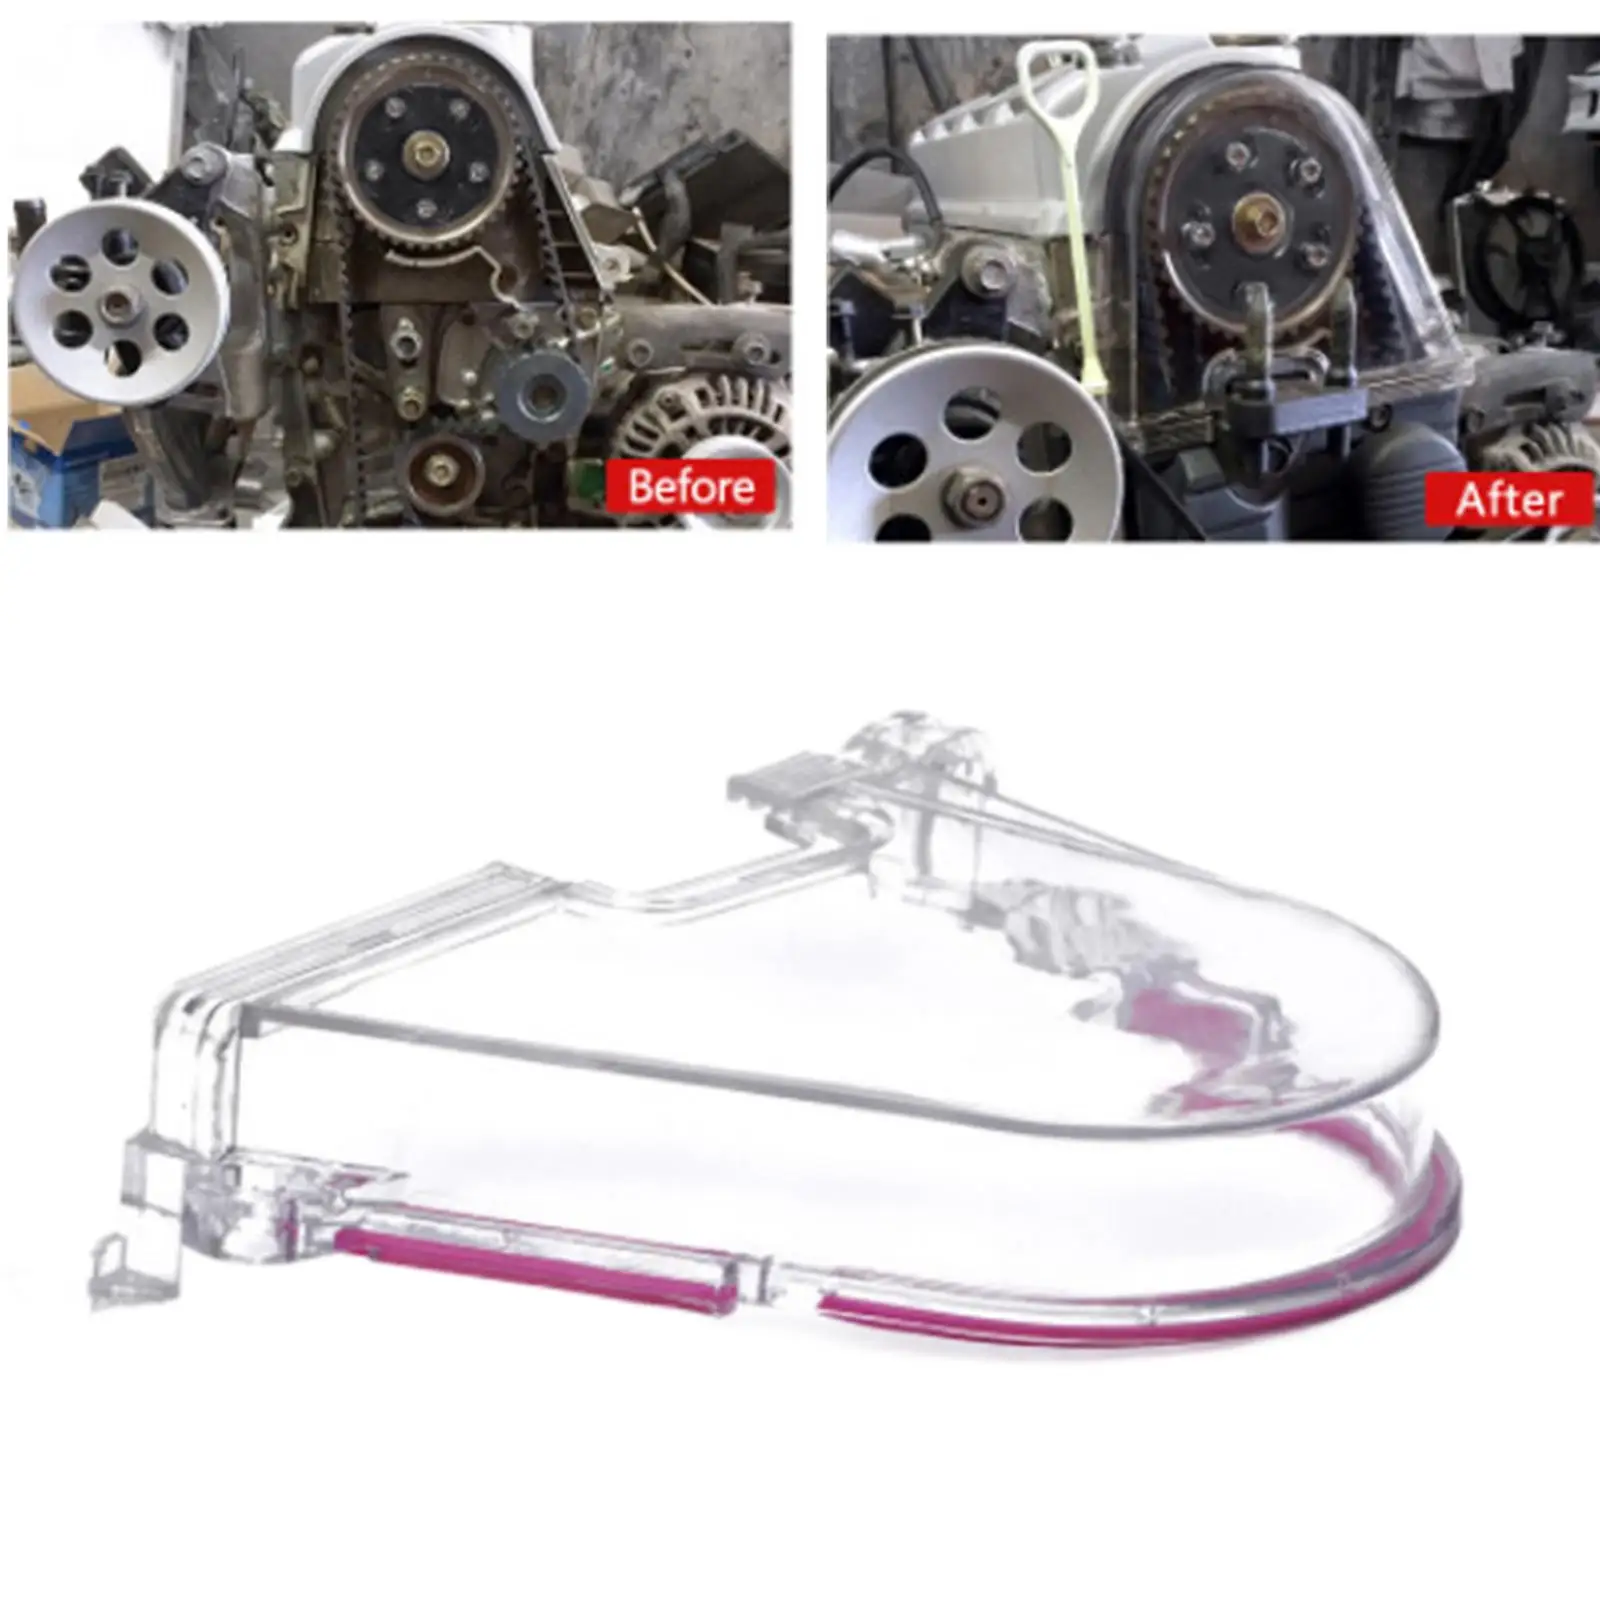 Clear Cam Gear Belt Cover Modified Accessories Turbo Cam Pulley for Honda Civic 96-2000 D15 D16 Auto Parts Car Supplies